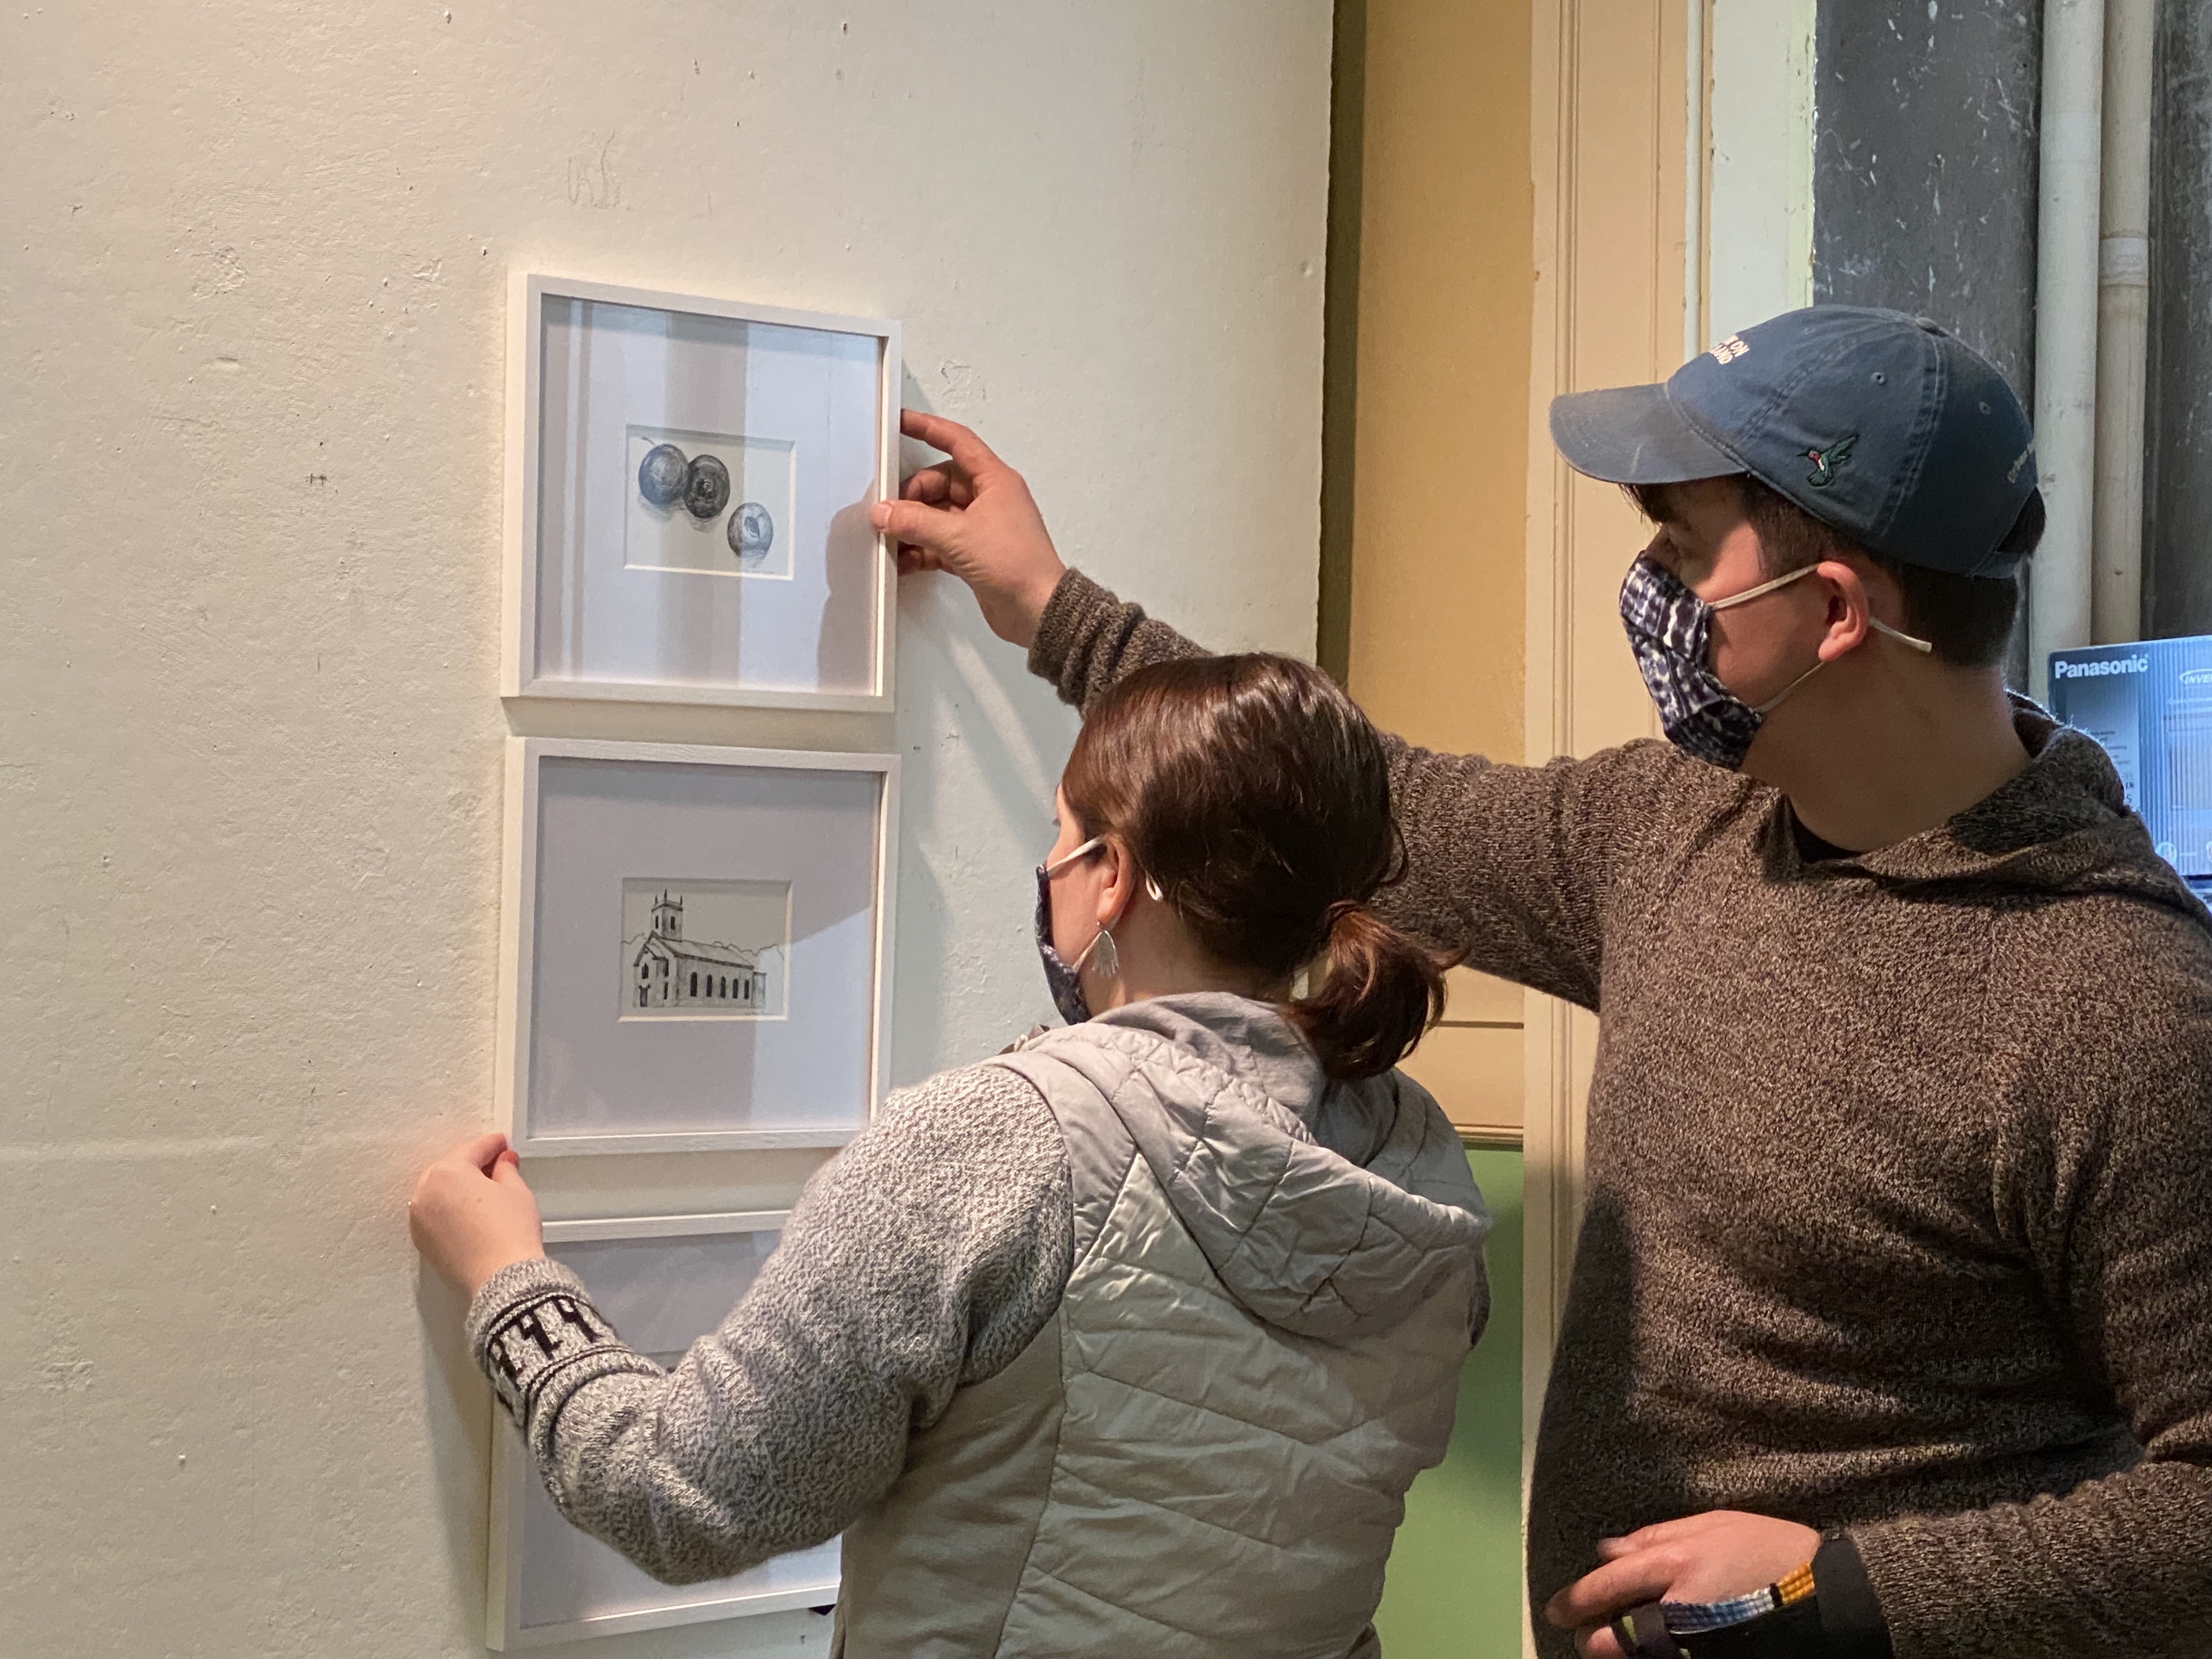 Artist Amy Hook Therrien in white knobby sweater is assisted by partner Alex wearing baseball cap to hang a series of 3 smaller pen & ink drawings in a verticle line on display panel at LNT